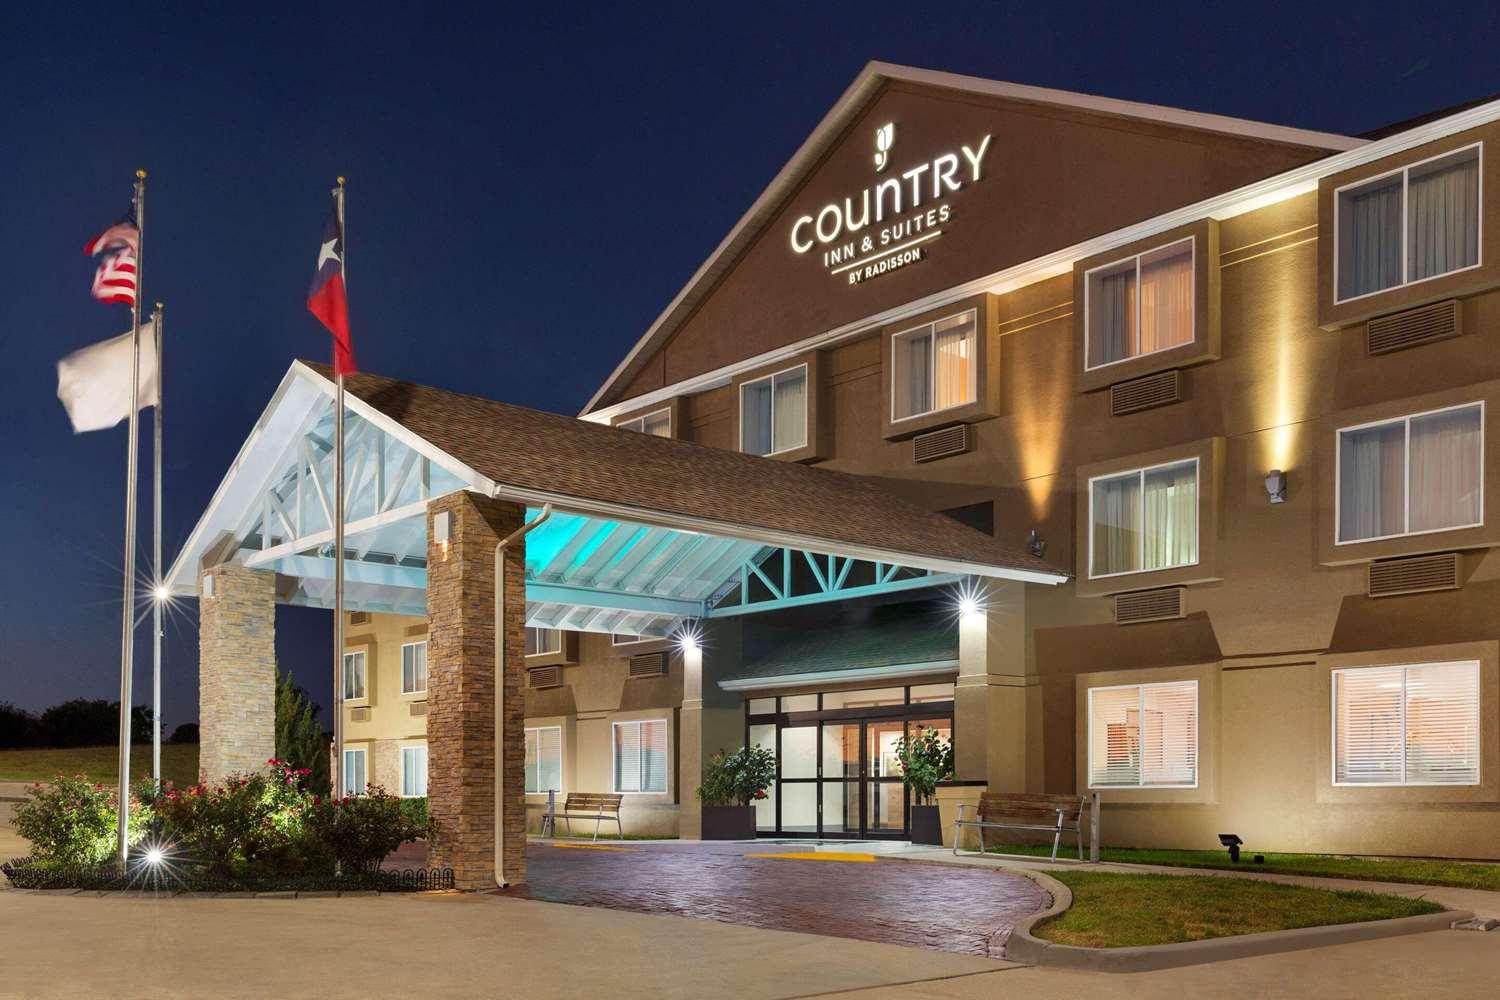 Country Inn & Suites By Radisson, Fort Worth West, TX in Fort Worth, TX